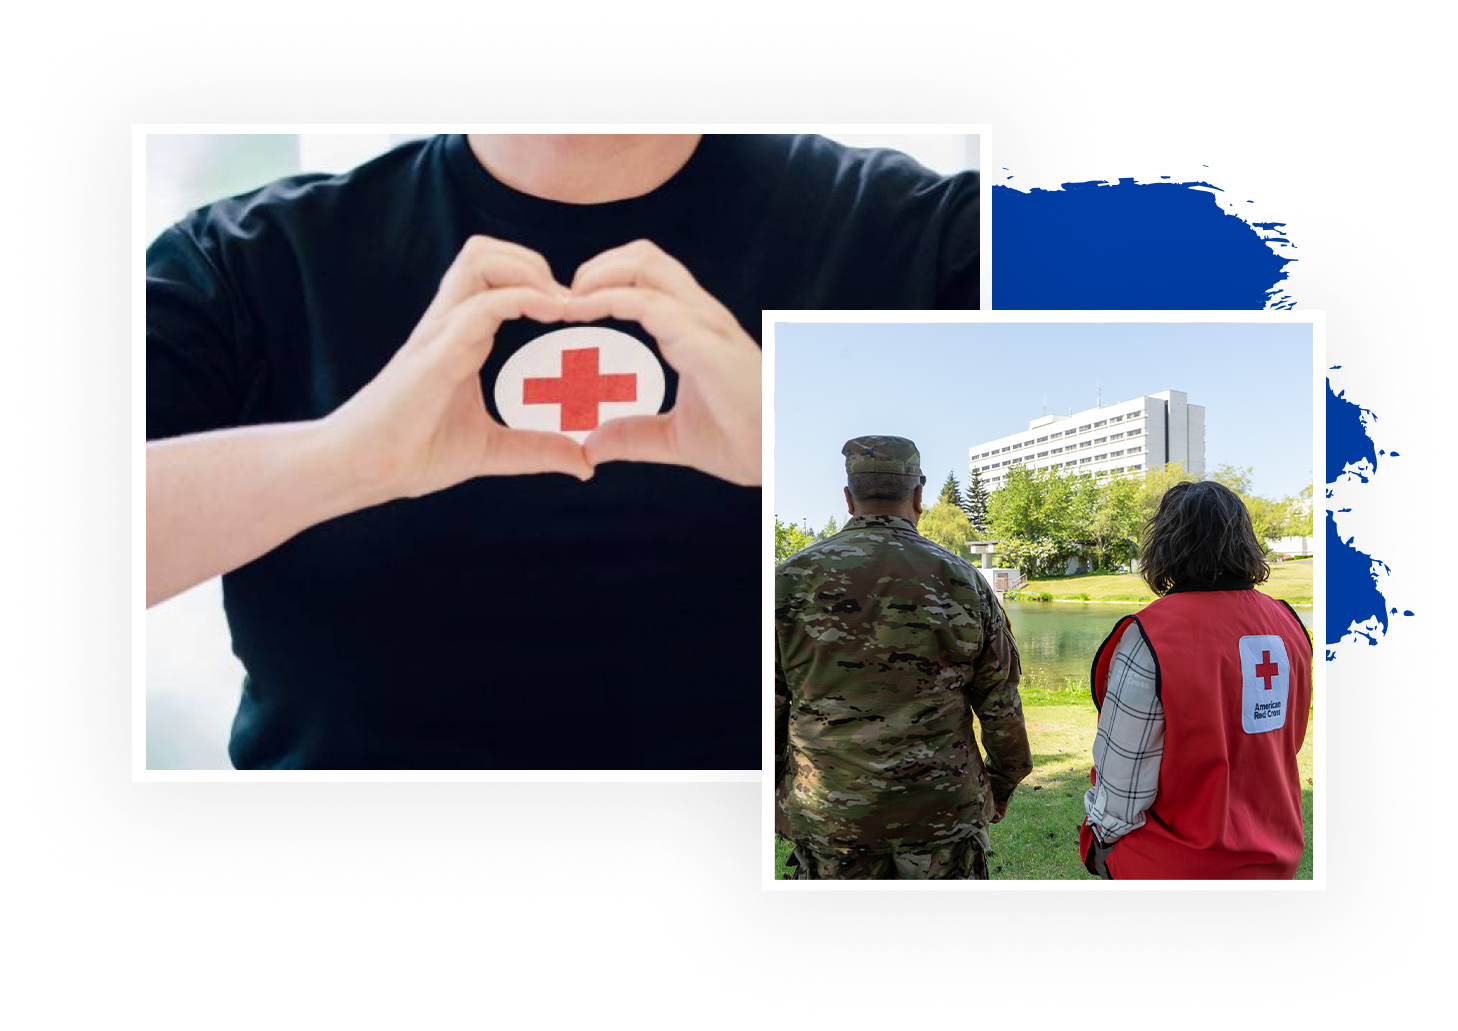 Left image shows someone making a heart with their hands over the Red Cross logo on their t-shirt. Right image shows a Red Cross volunteer standing next to a military member overlooking a pond and building.